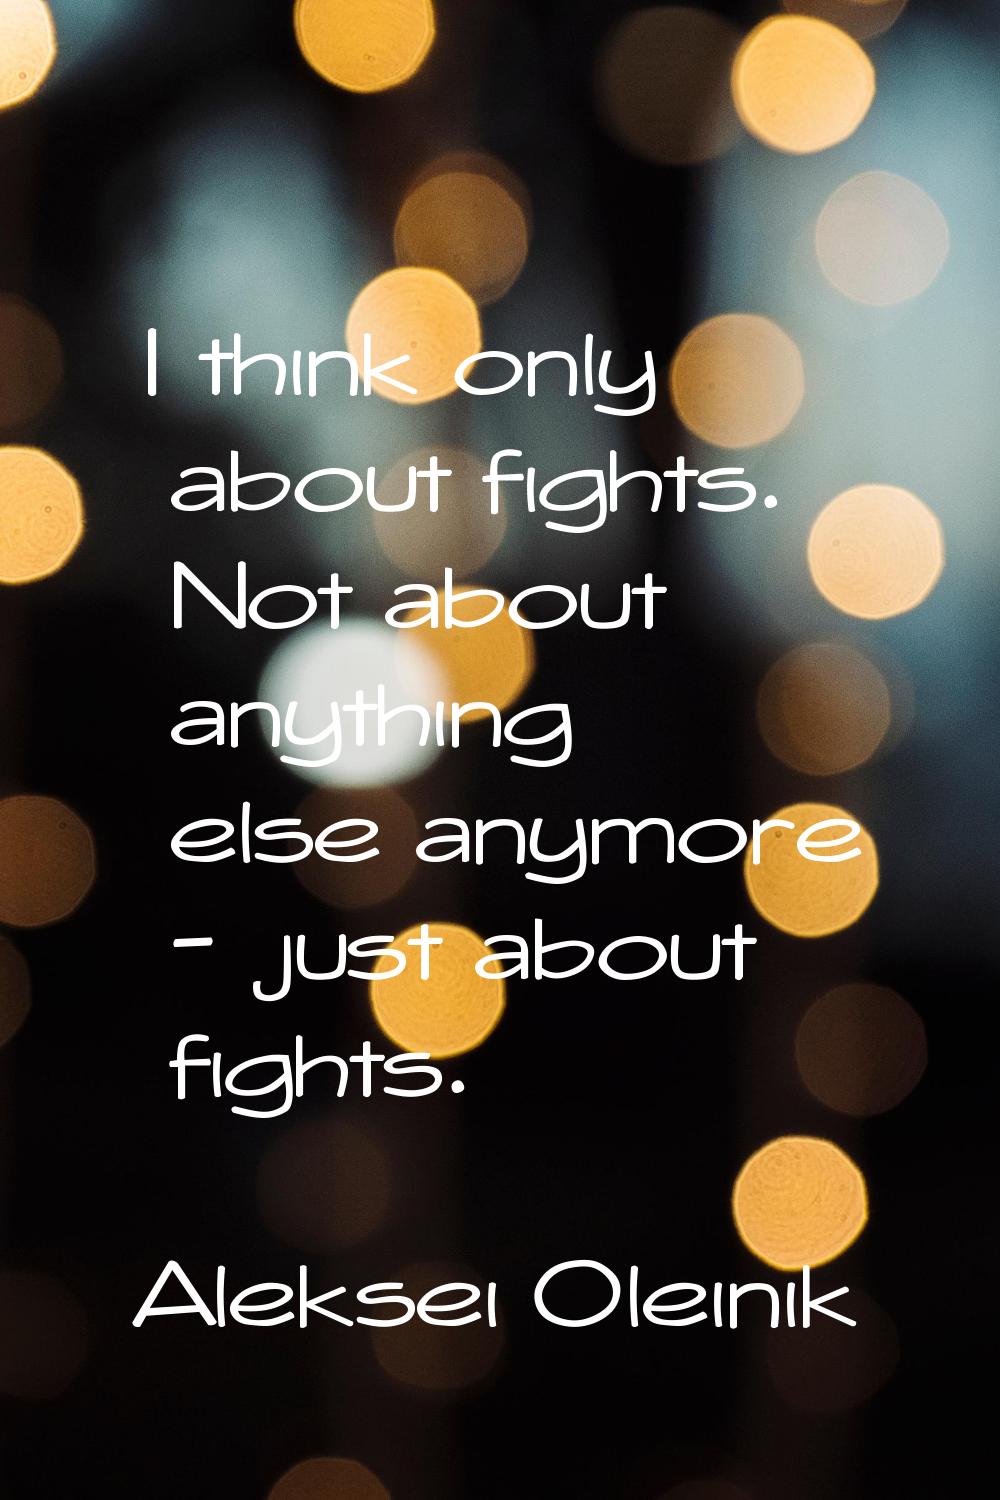 I think only about fights. Not about anything else anymore - just about fights.